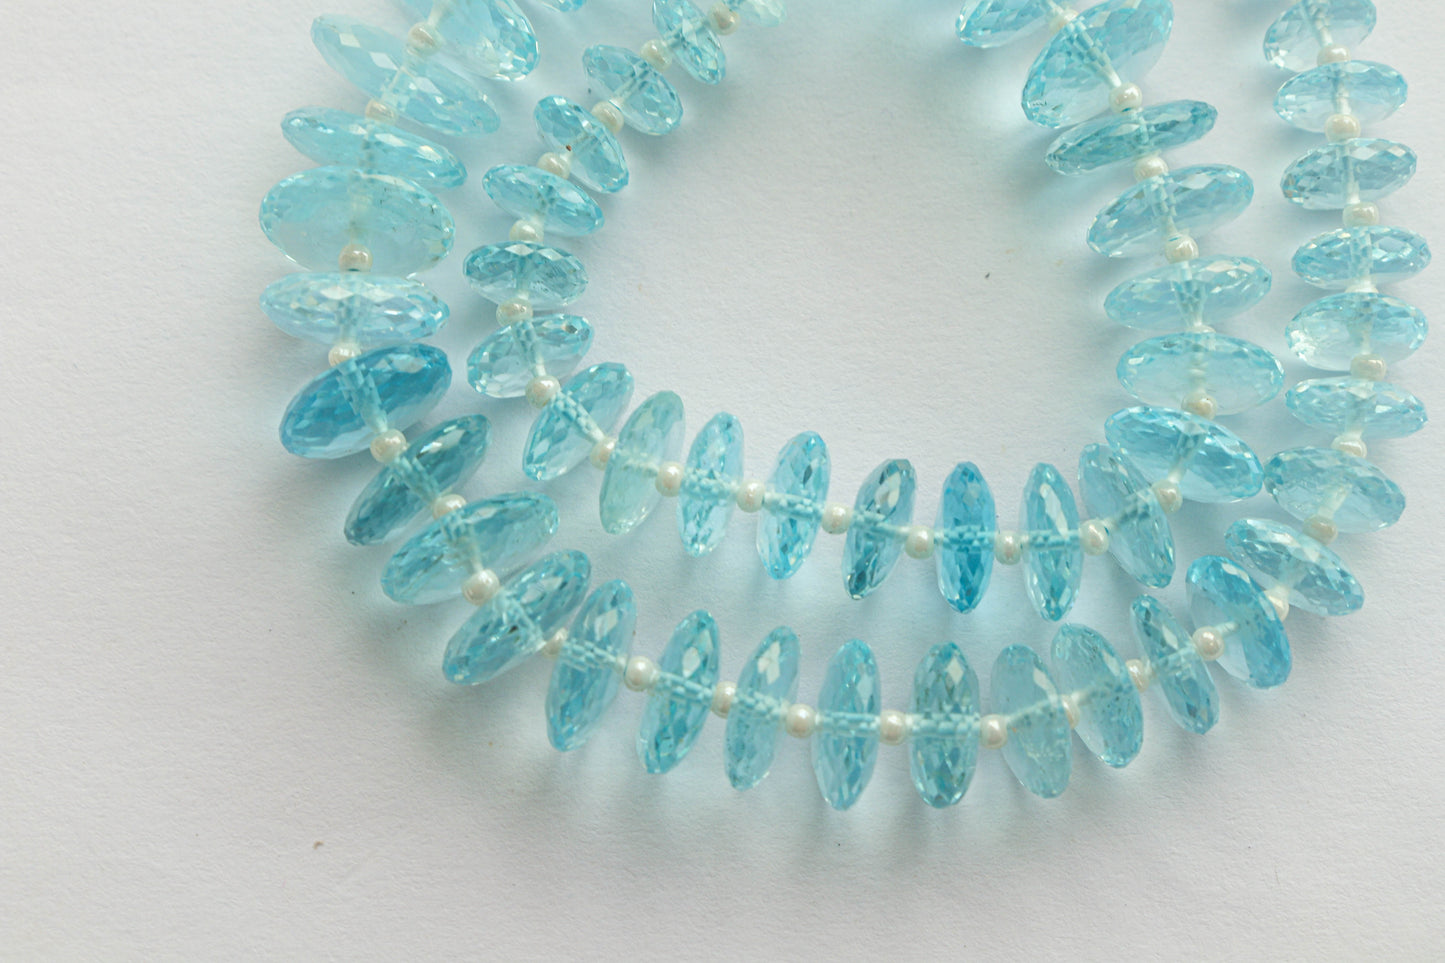 Blue Topaz Faceted Rondelle Beads | 12 Inch String Beadsforyourjewelry